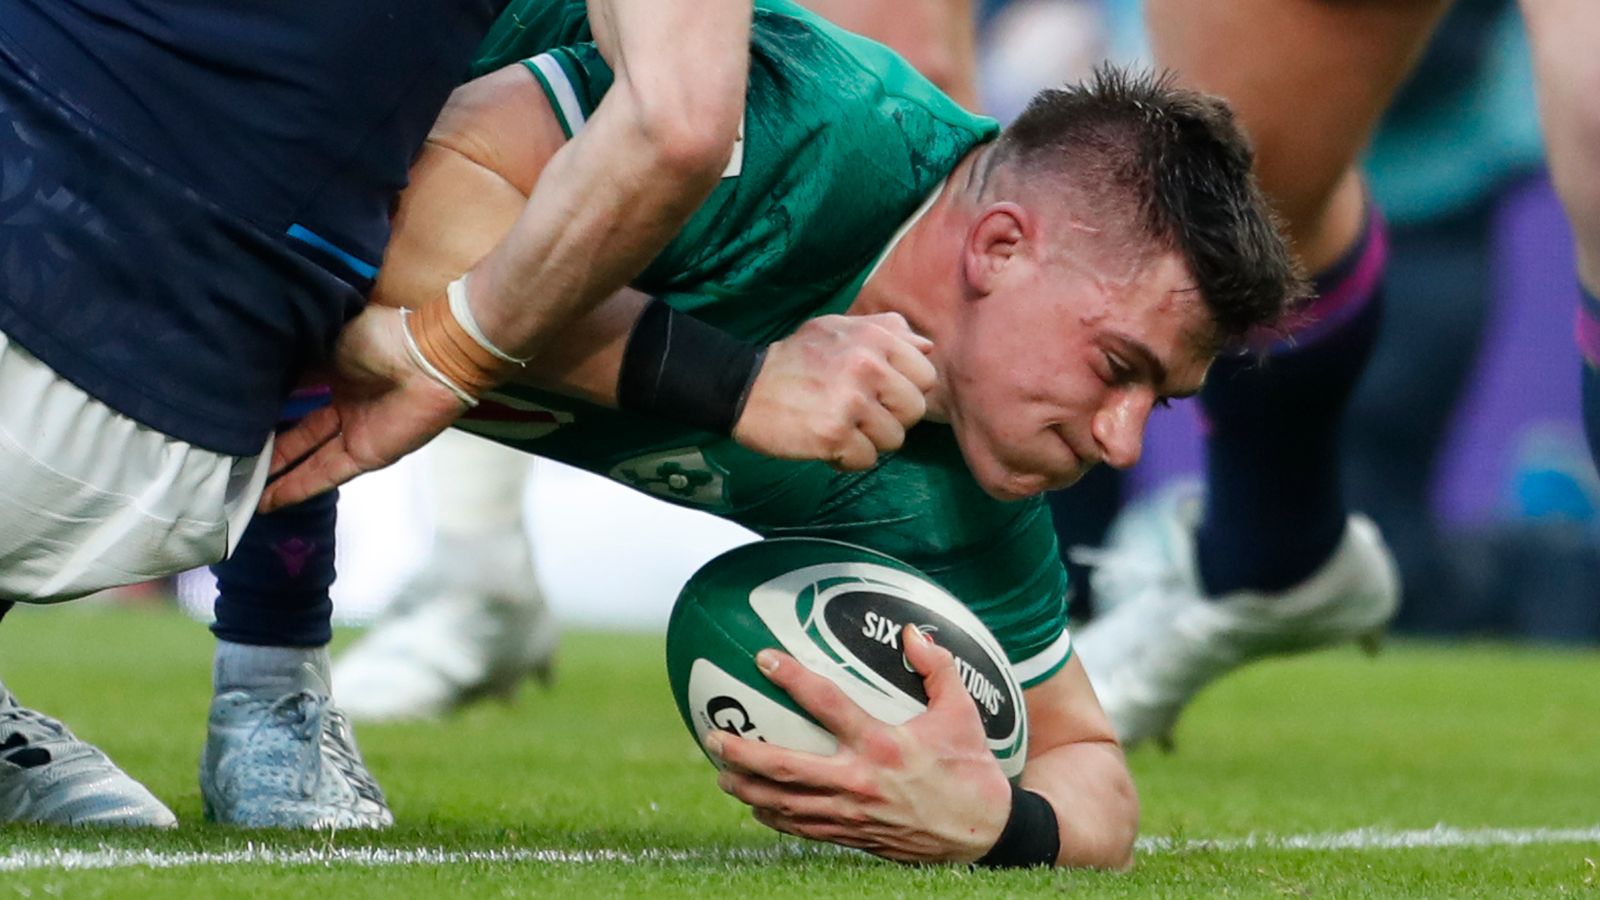 Ireland vs France Six Nations Dan Sheehan ruled out injured as Rob Herring comes in; Conor Murray fit to start Rugby Union News Sky Sports